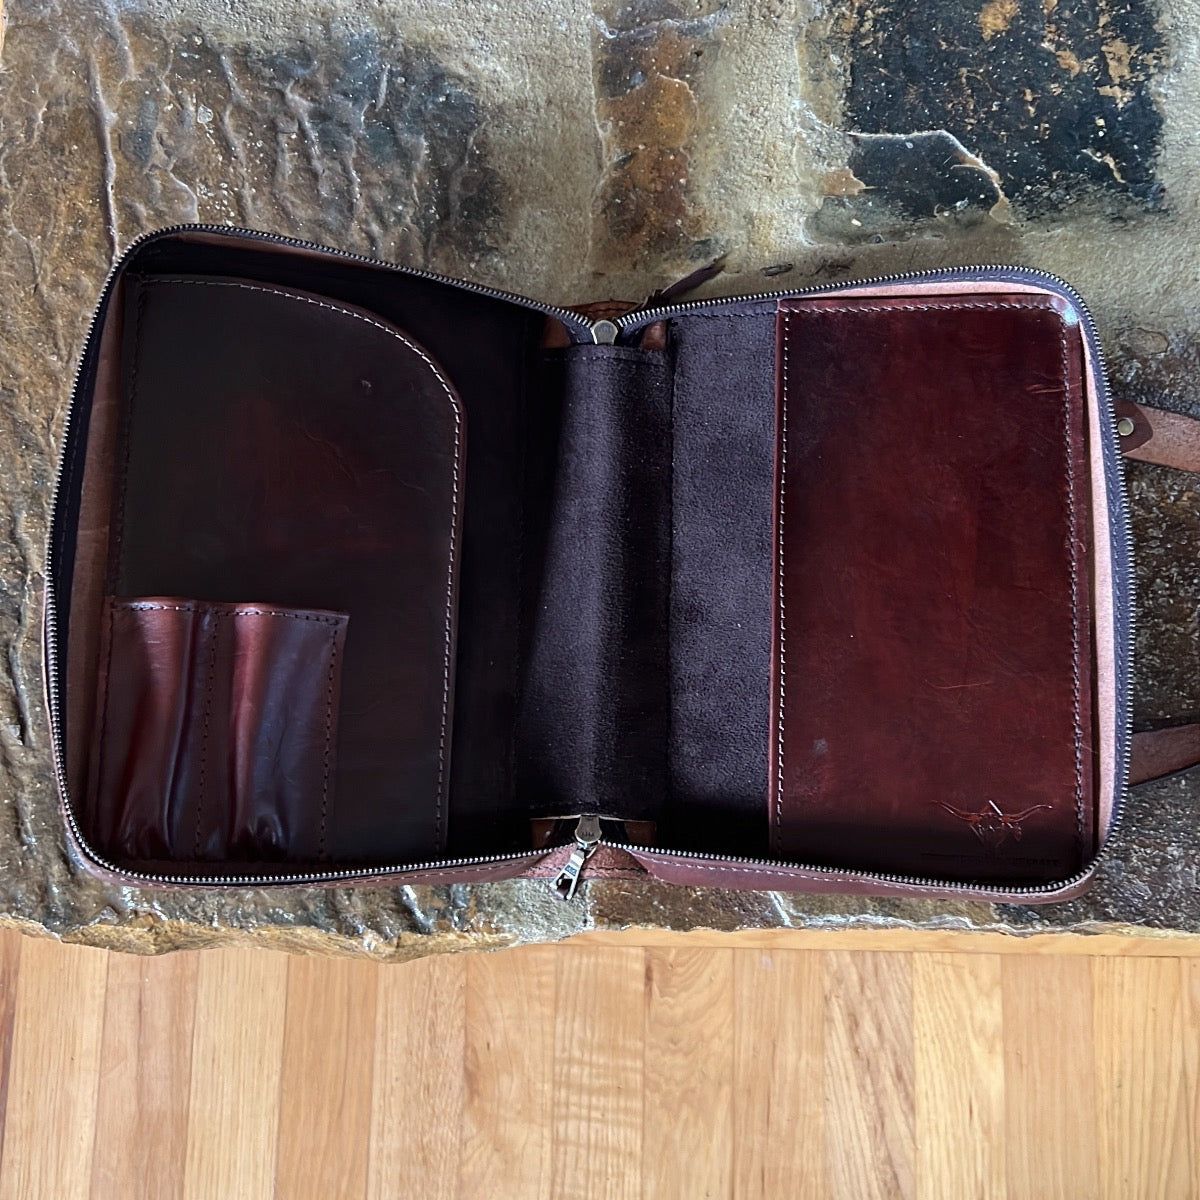 Custom Leather Bible Cover